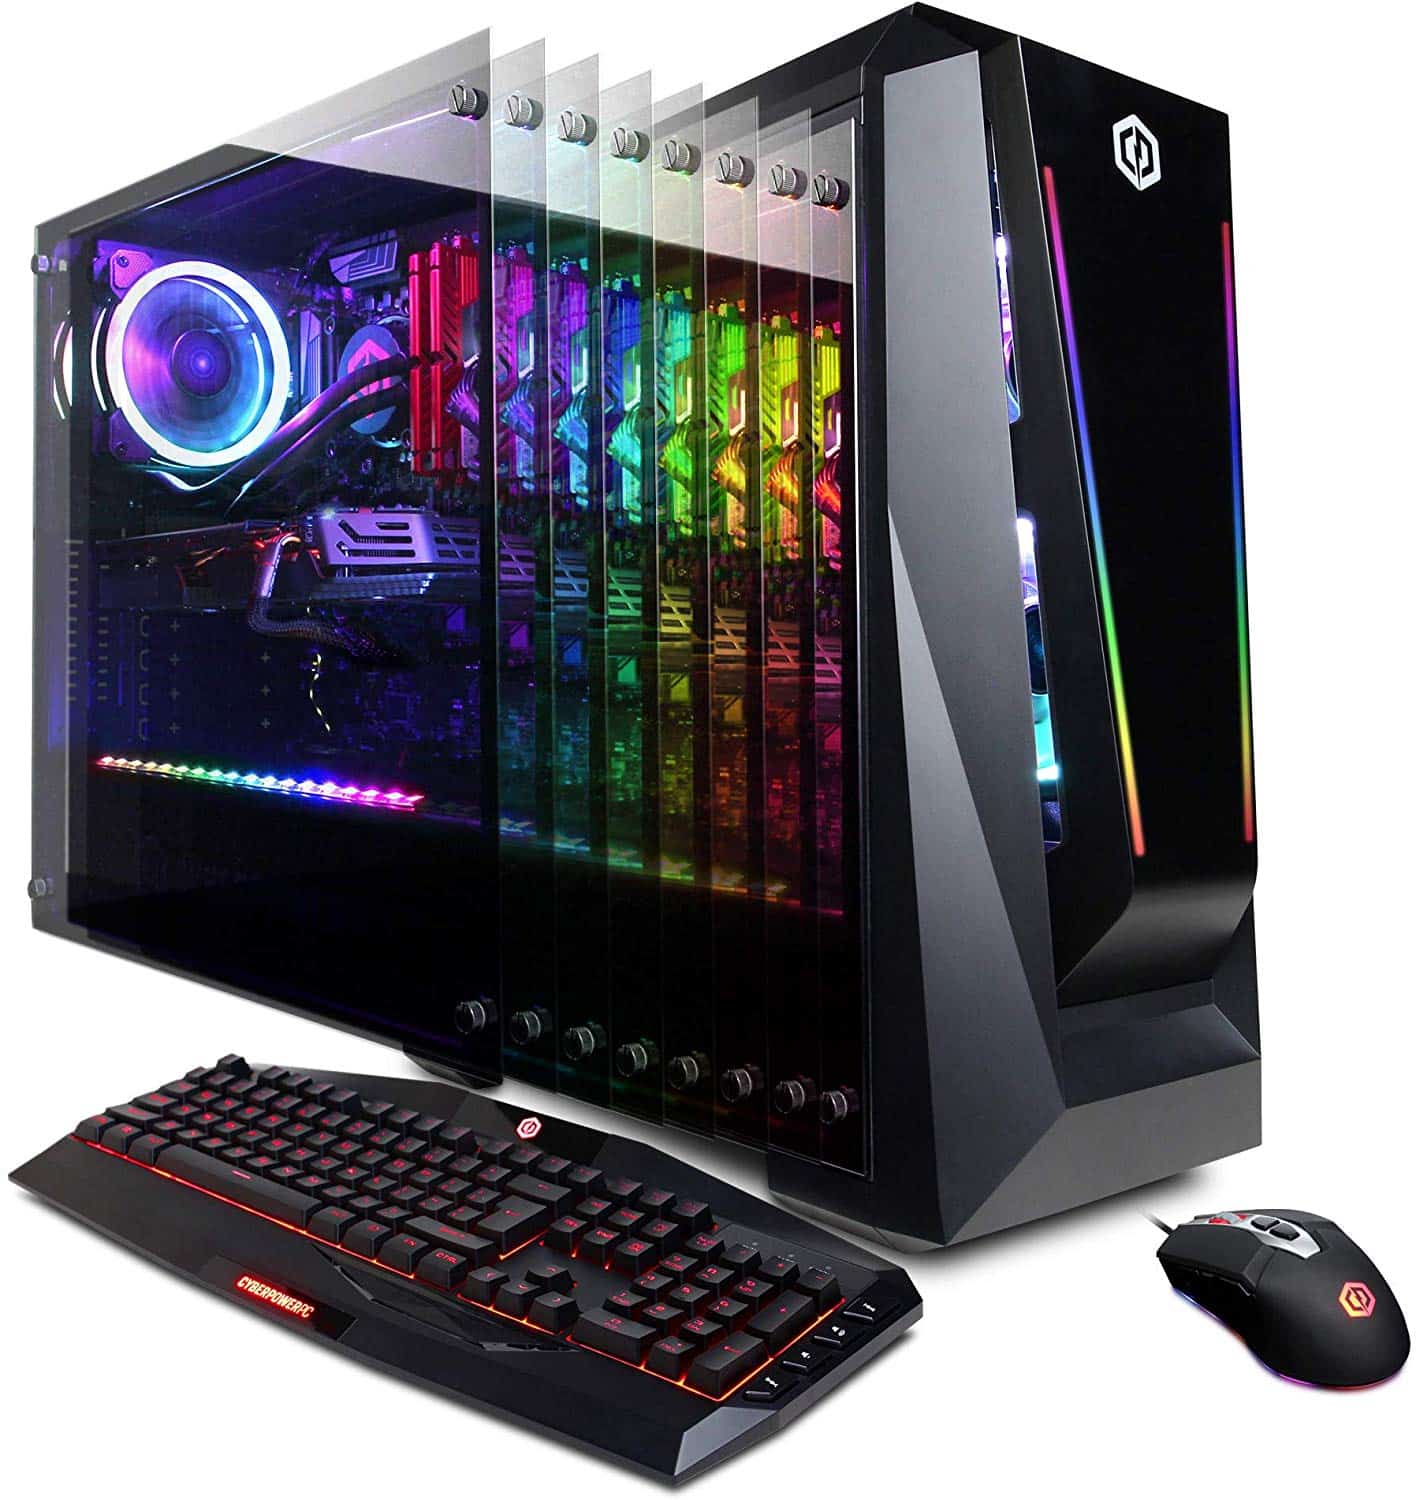 Best Gaming PC under $1500 – a 2020 Buyer’s Guide